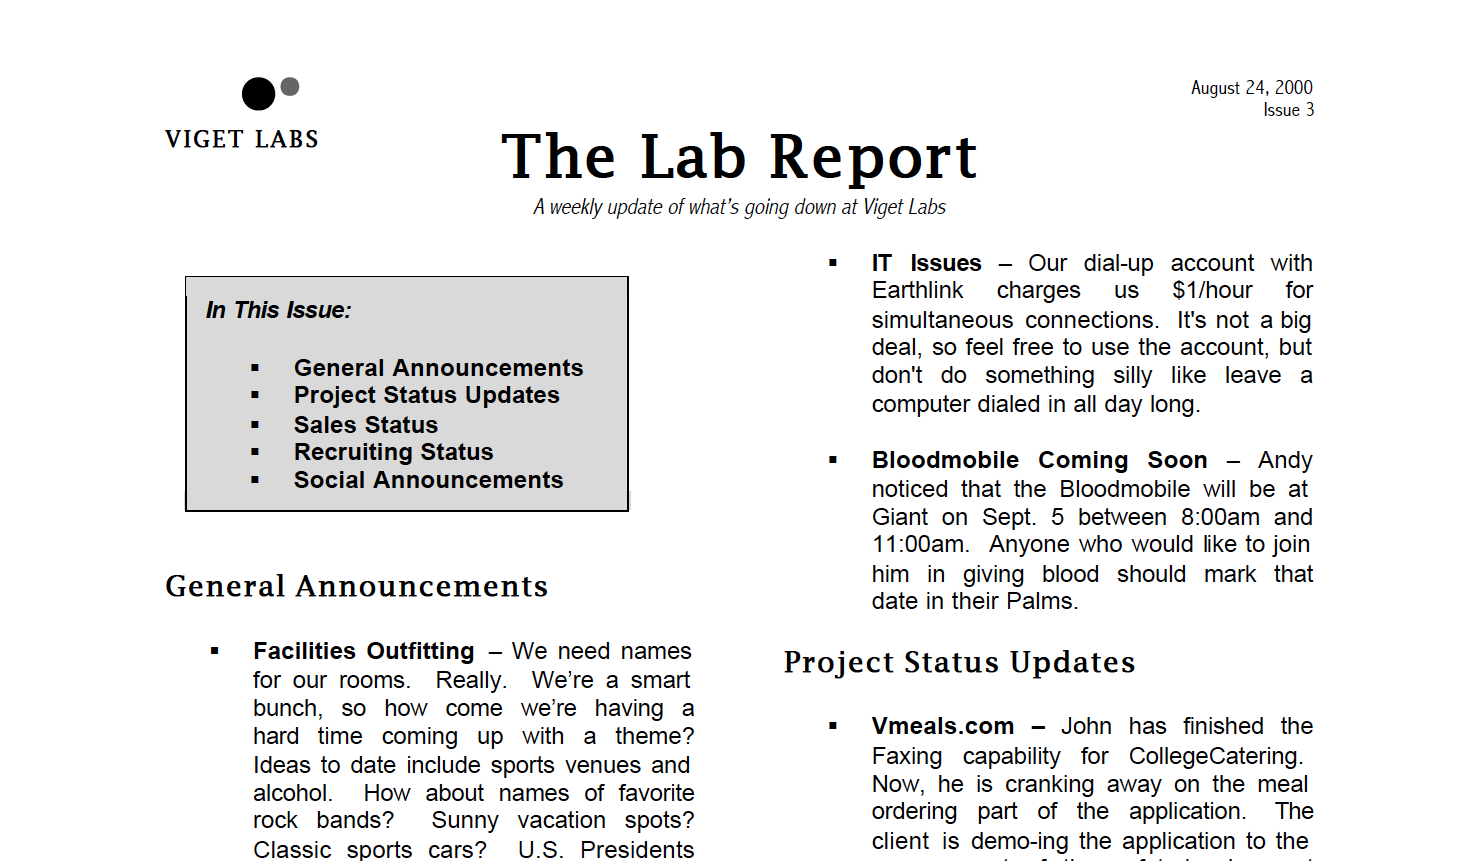 Viget Labs - Third issue of the Lab Report, August 24, 2000